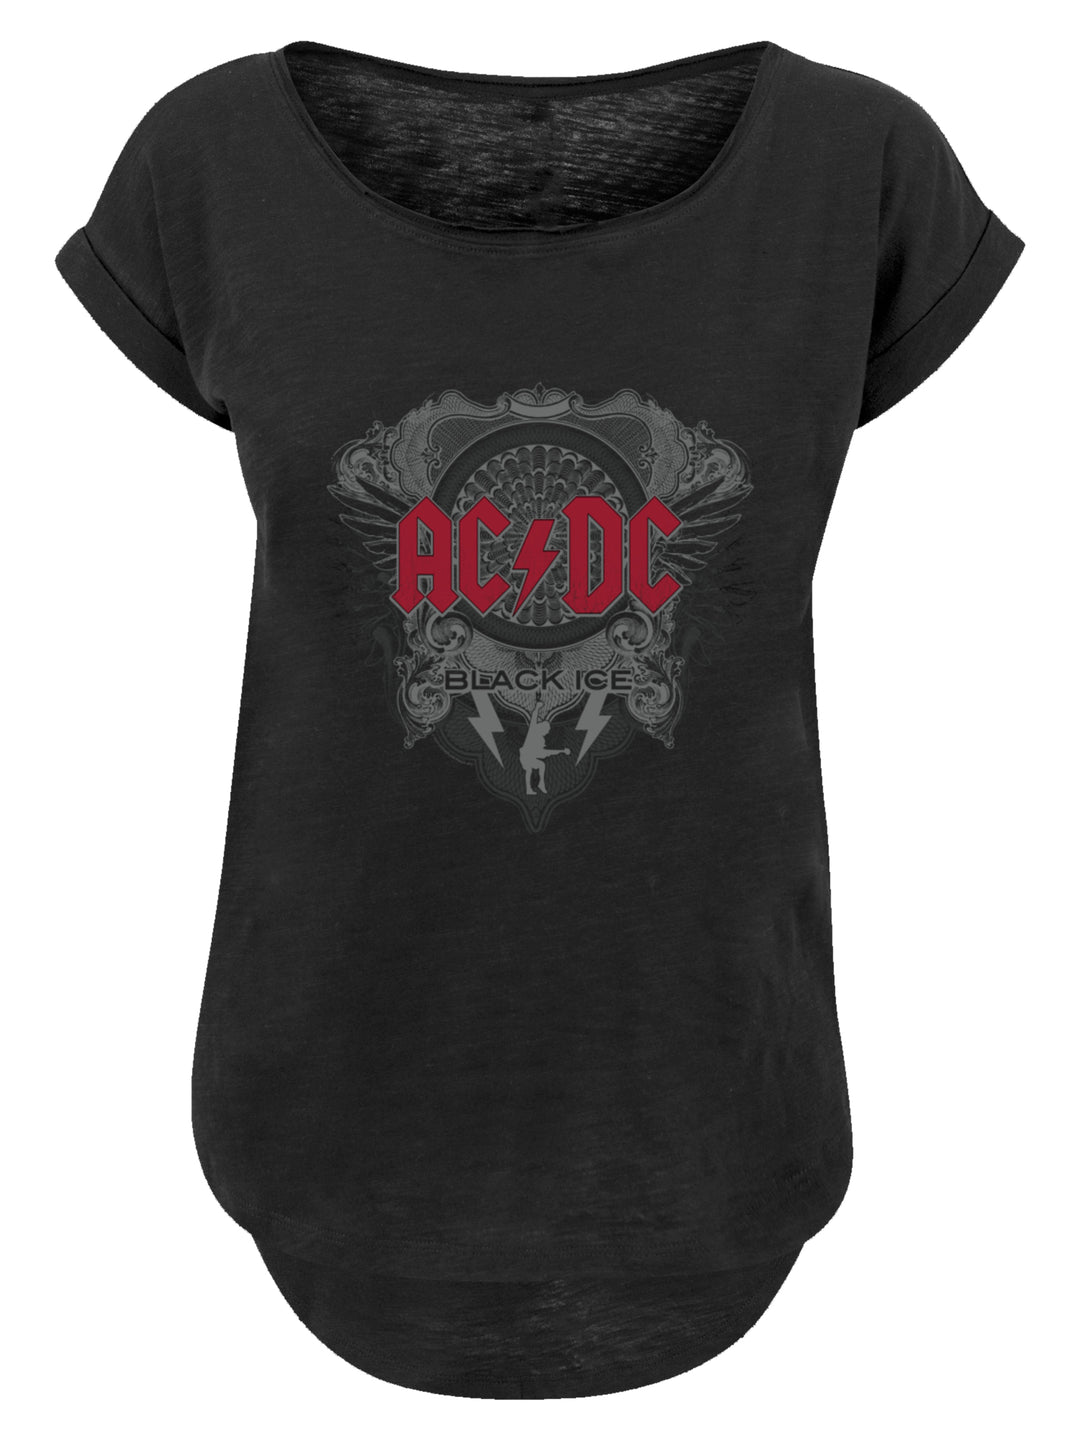 ACDC Black Ice with Red with Ladies Long Slub Tee